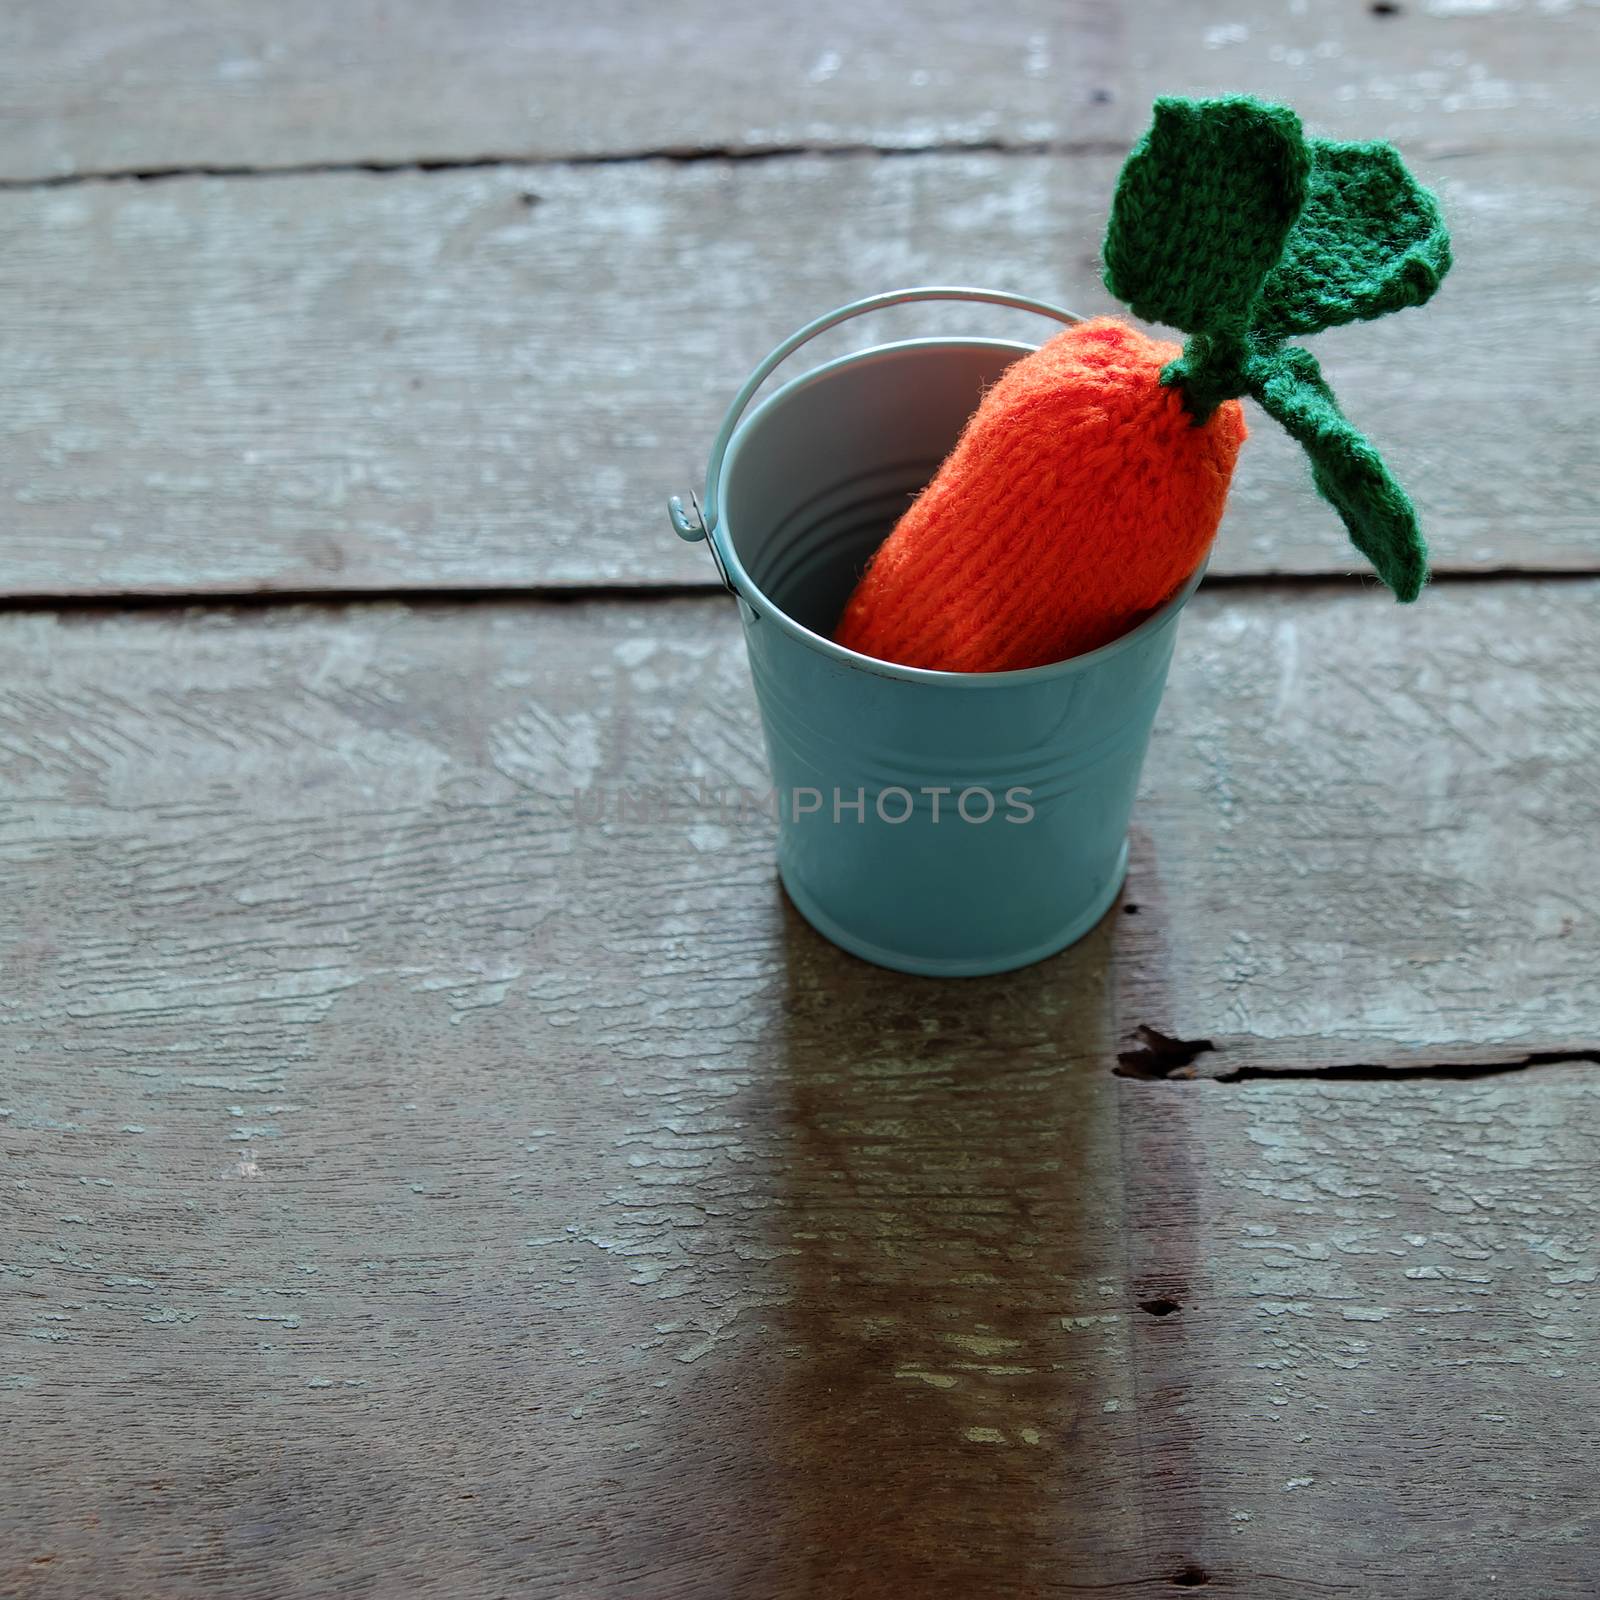 Knitted carrot vegetable on wood background, funny diy by knit from yarn, orange carot with green leaf